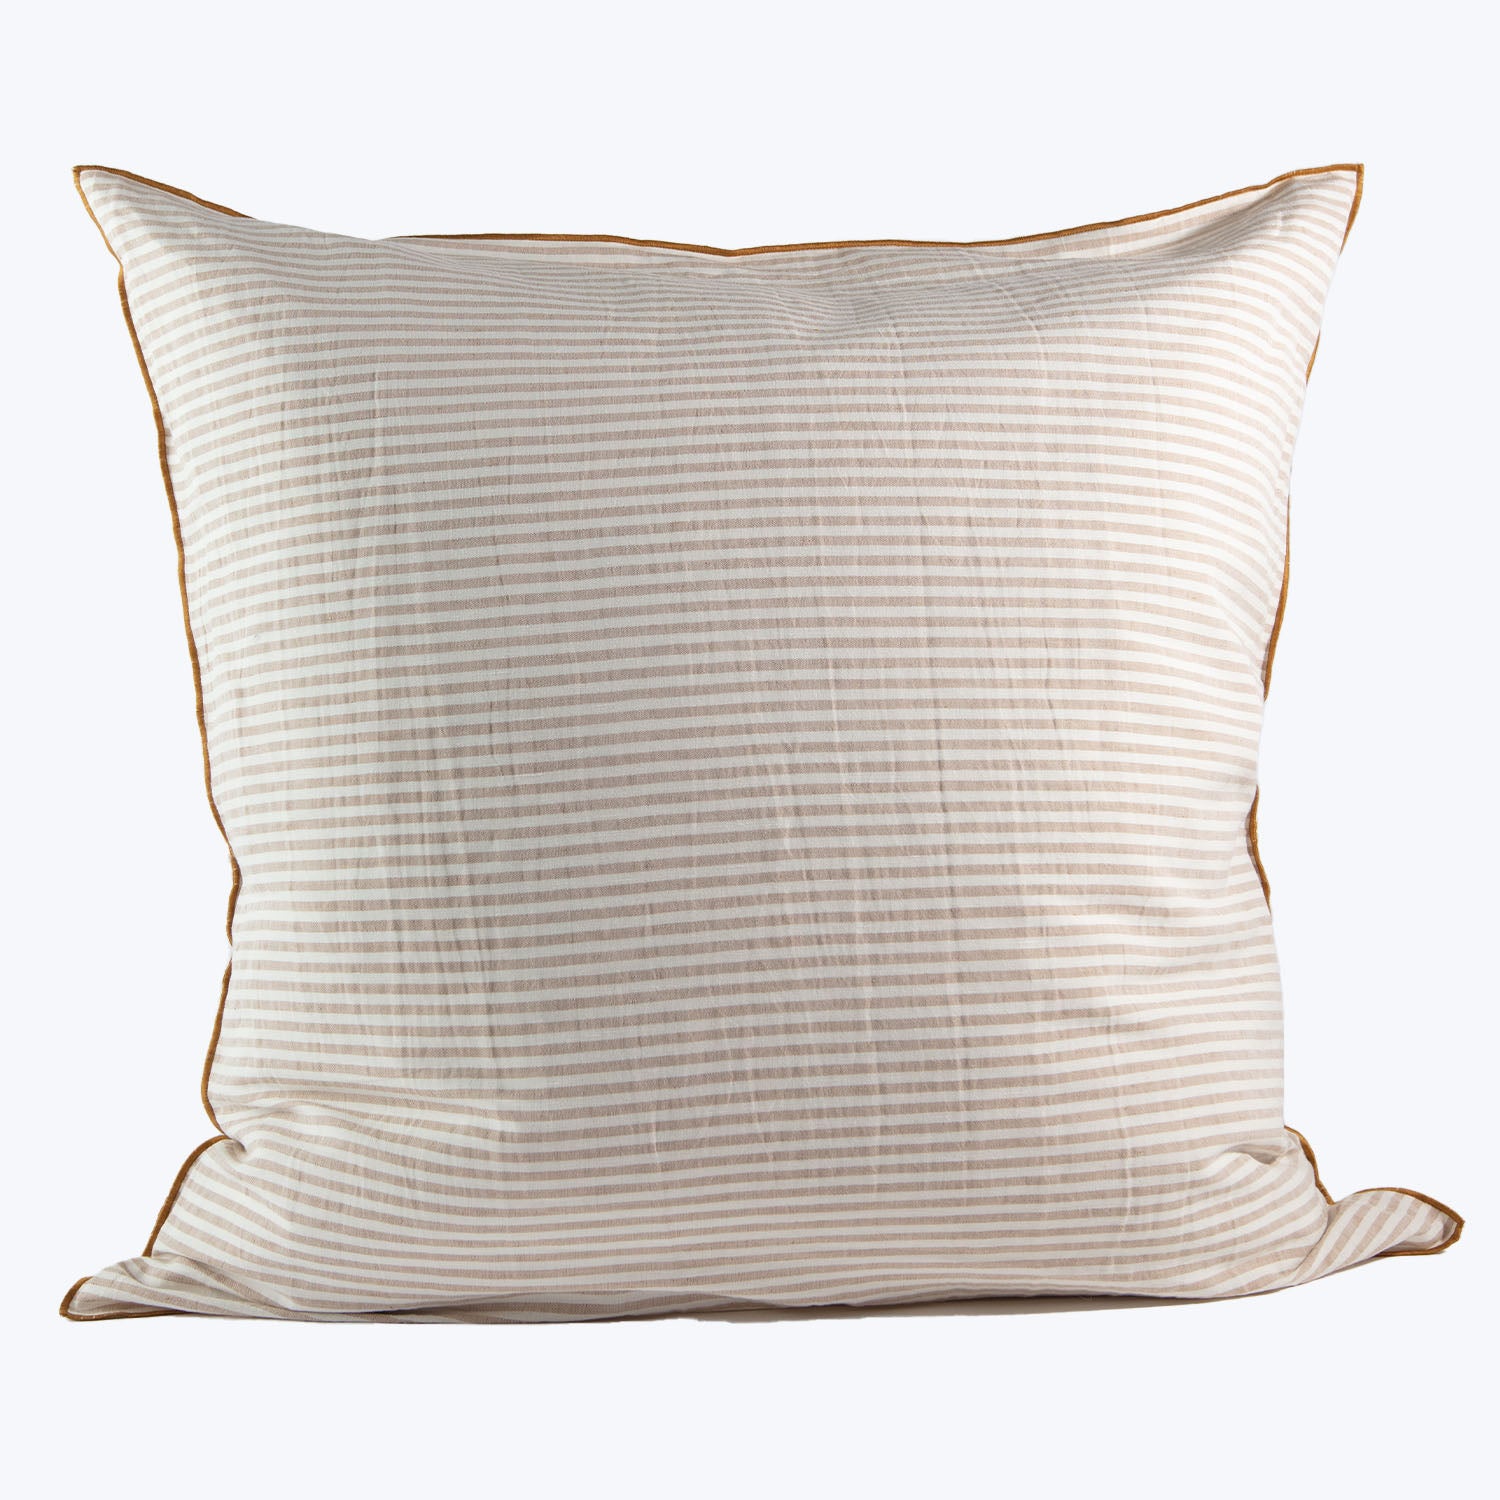 Square decorative pillow with subtle brown stripes and piping border.